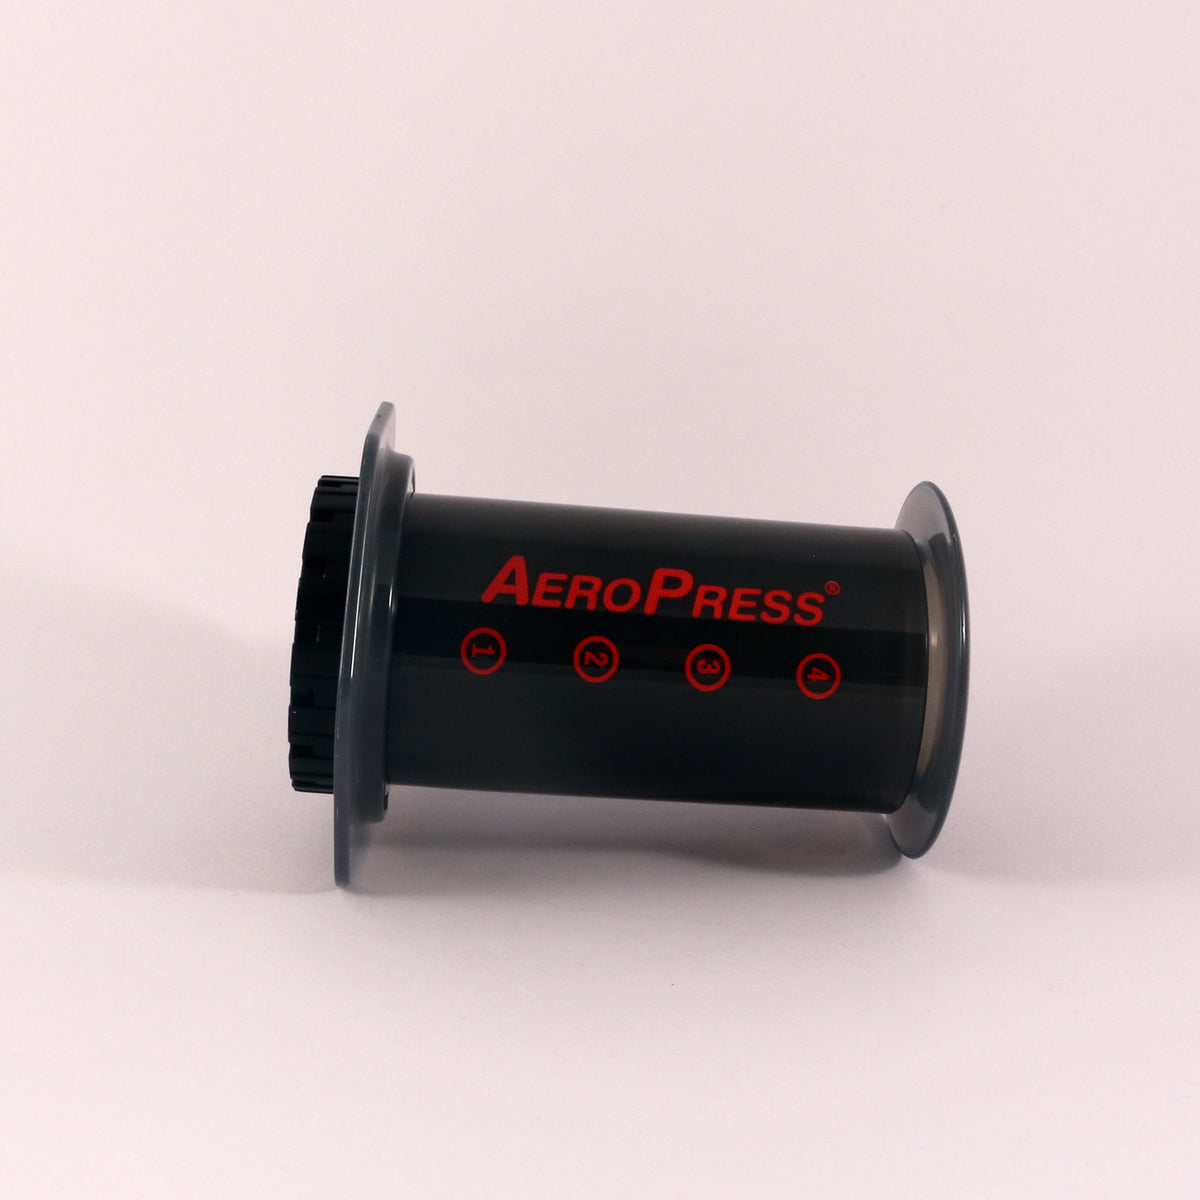 A Tandem Aeropress chamber with red text and symbols, positioned upright against a plain light background.